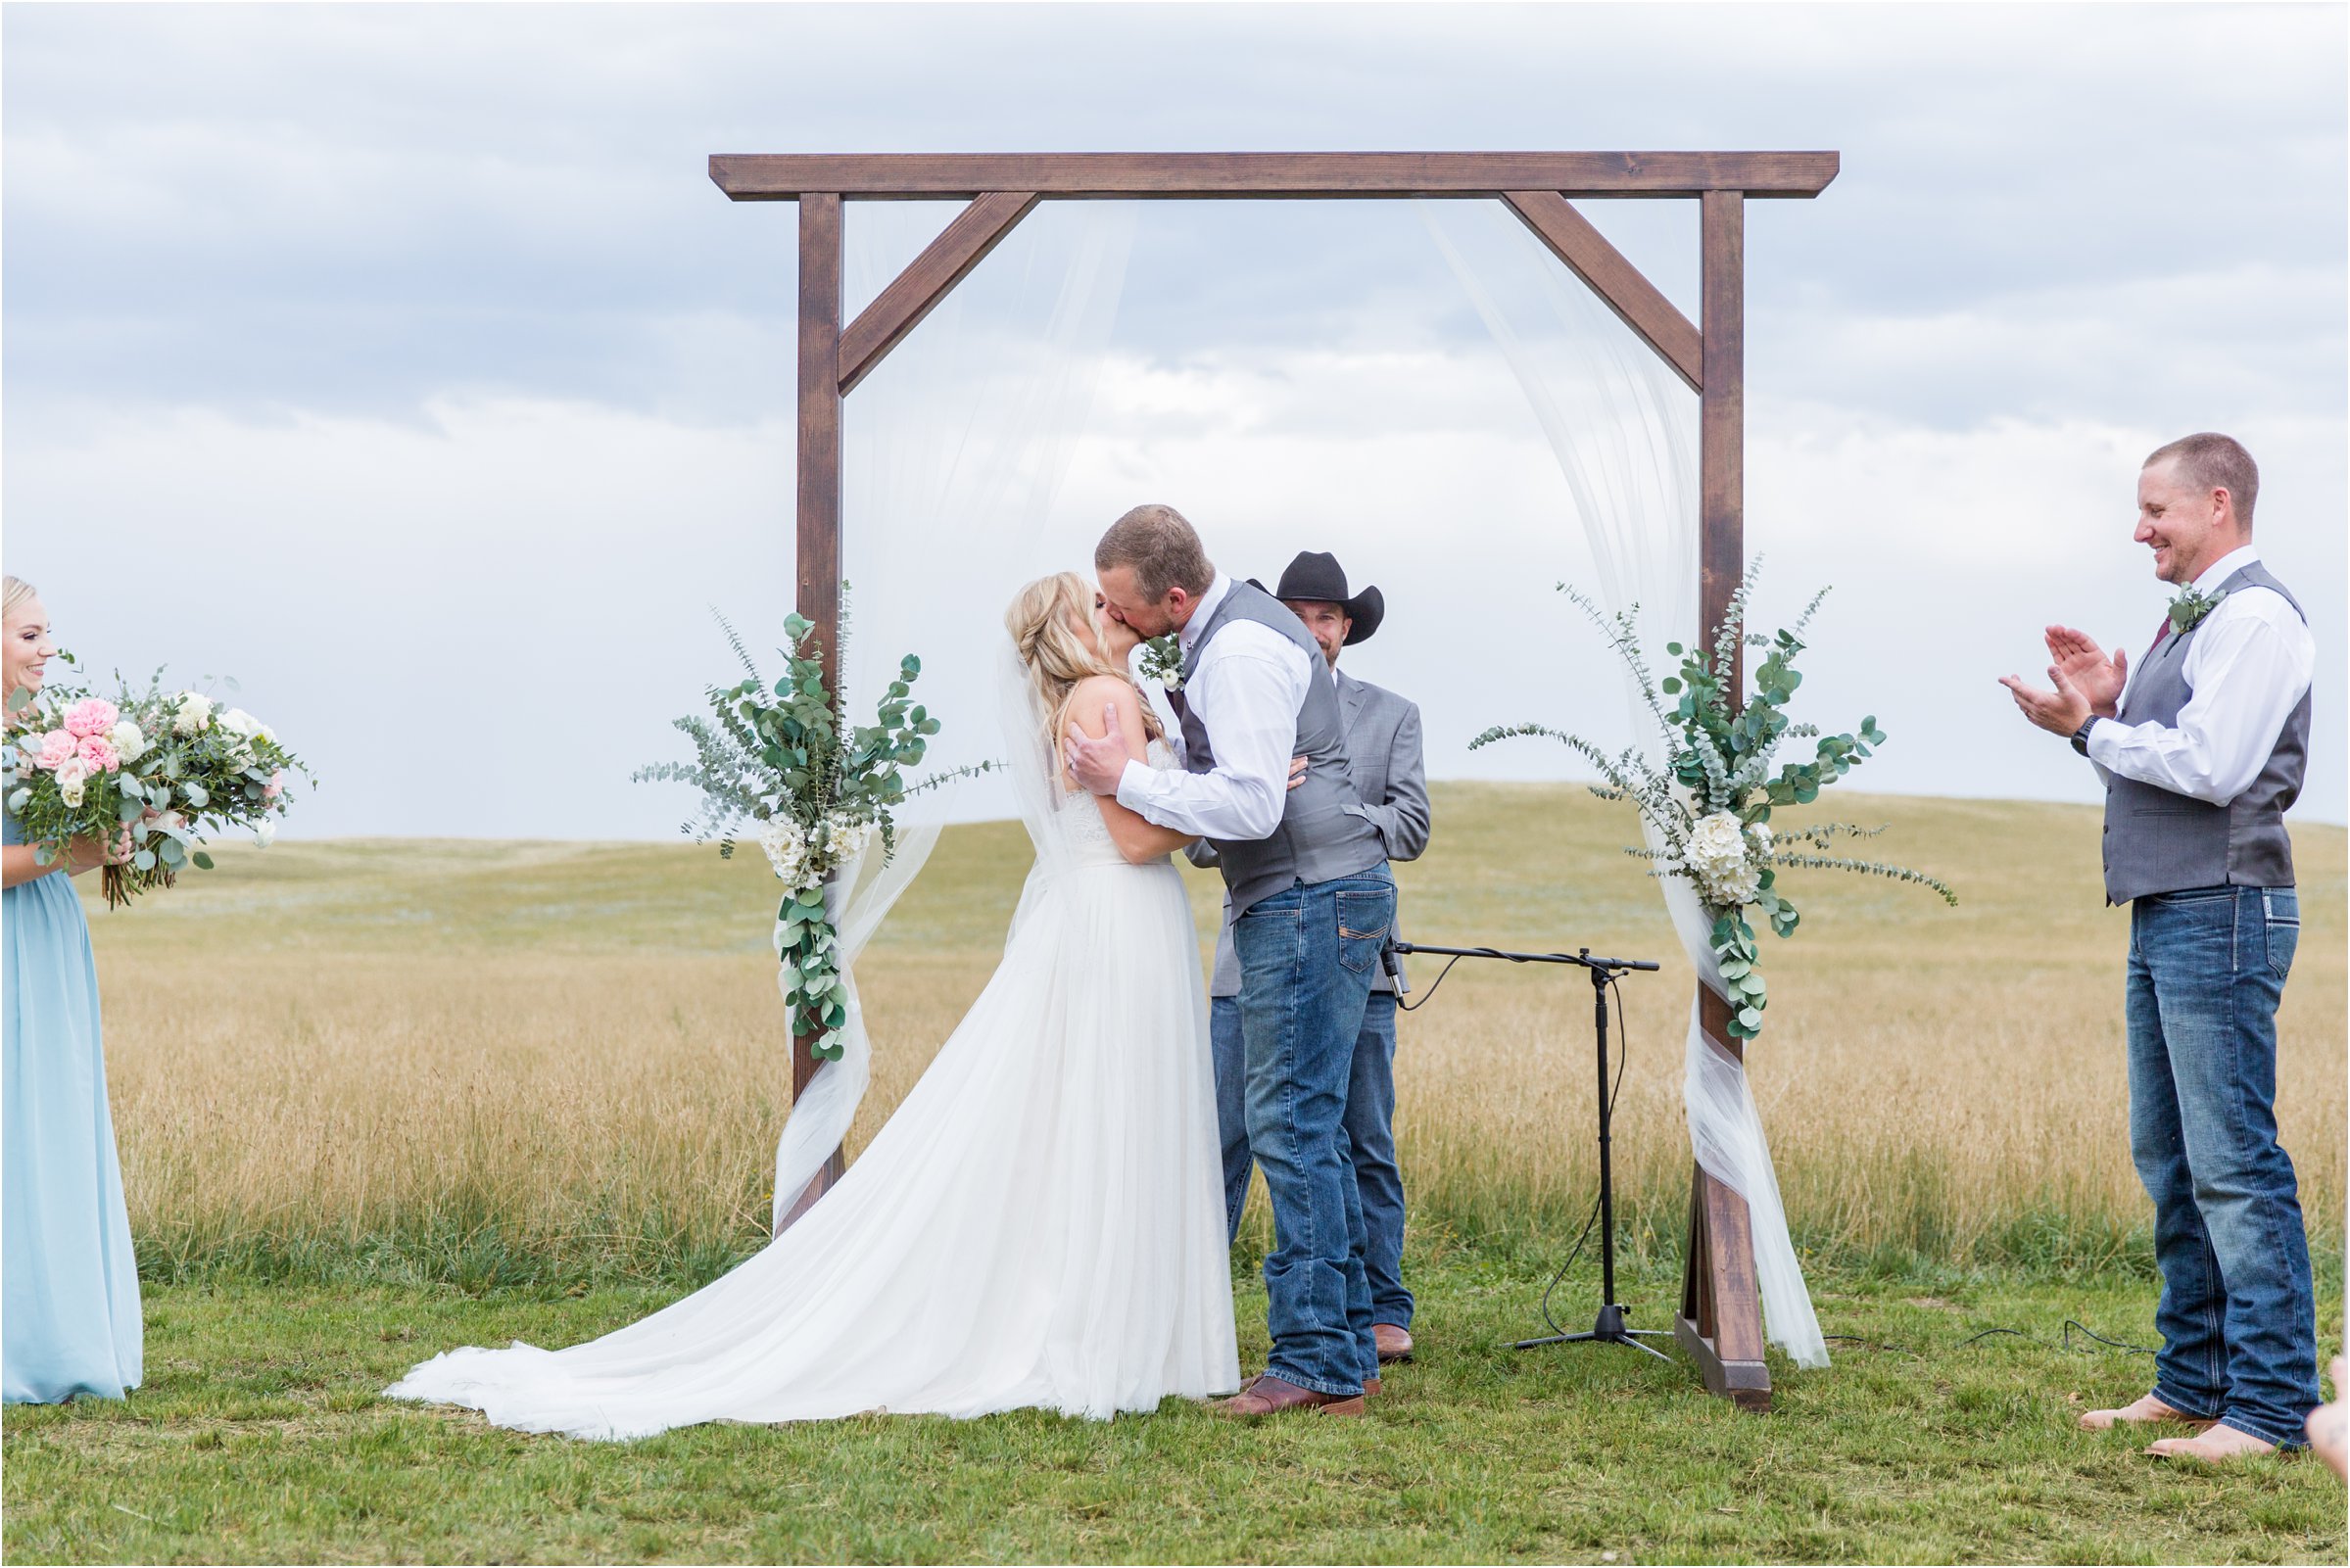 the bride and groom share their first kiss during their wyoming ceremony